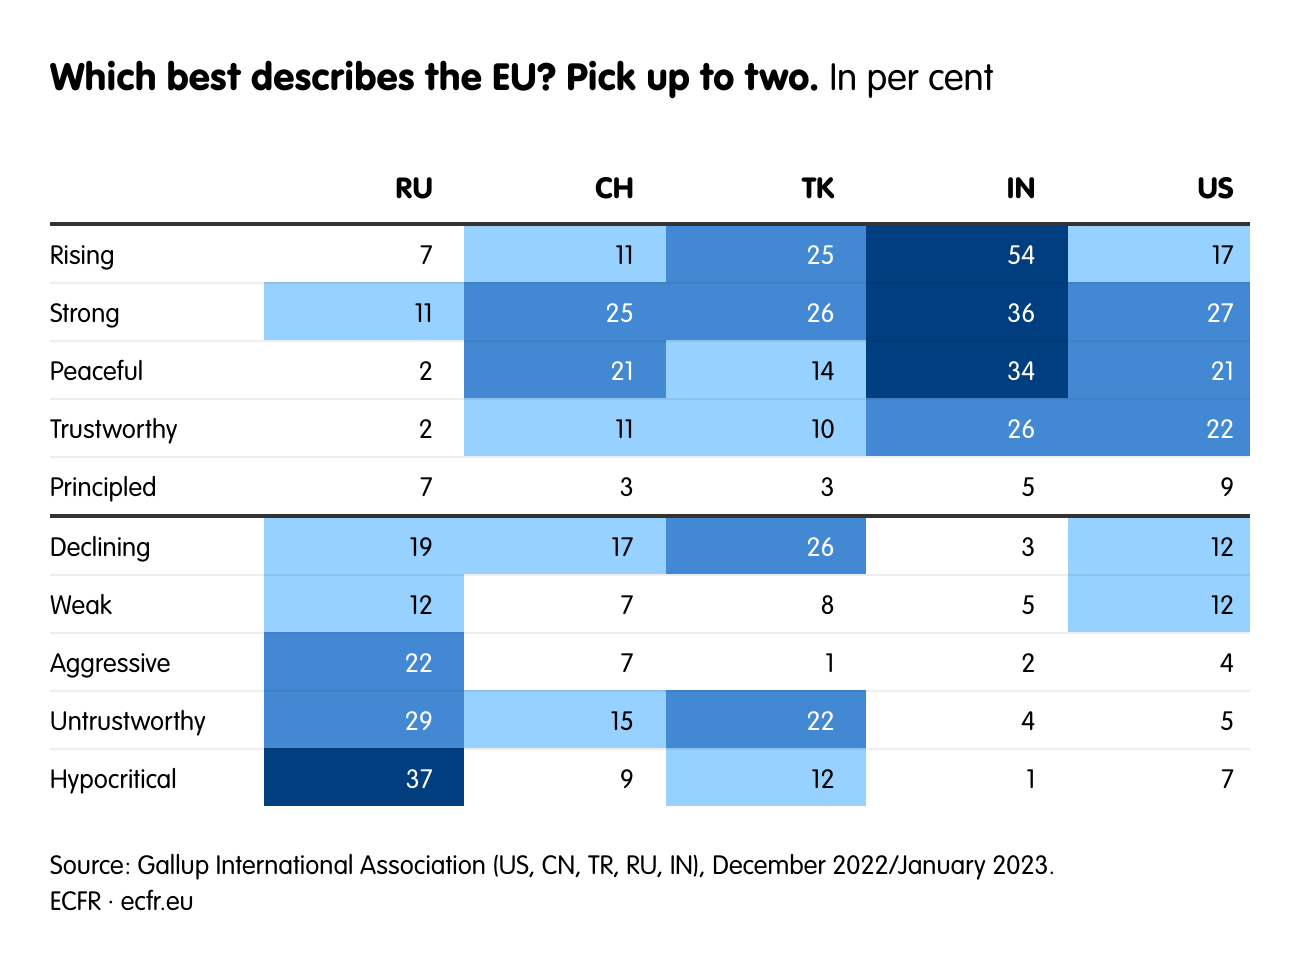 Which best describes the EU? Pick up to two.